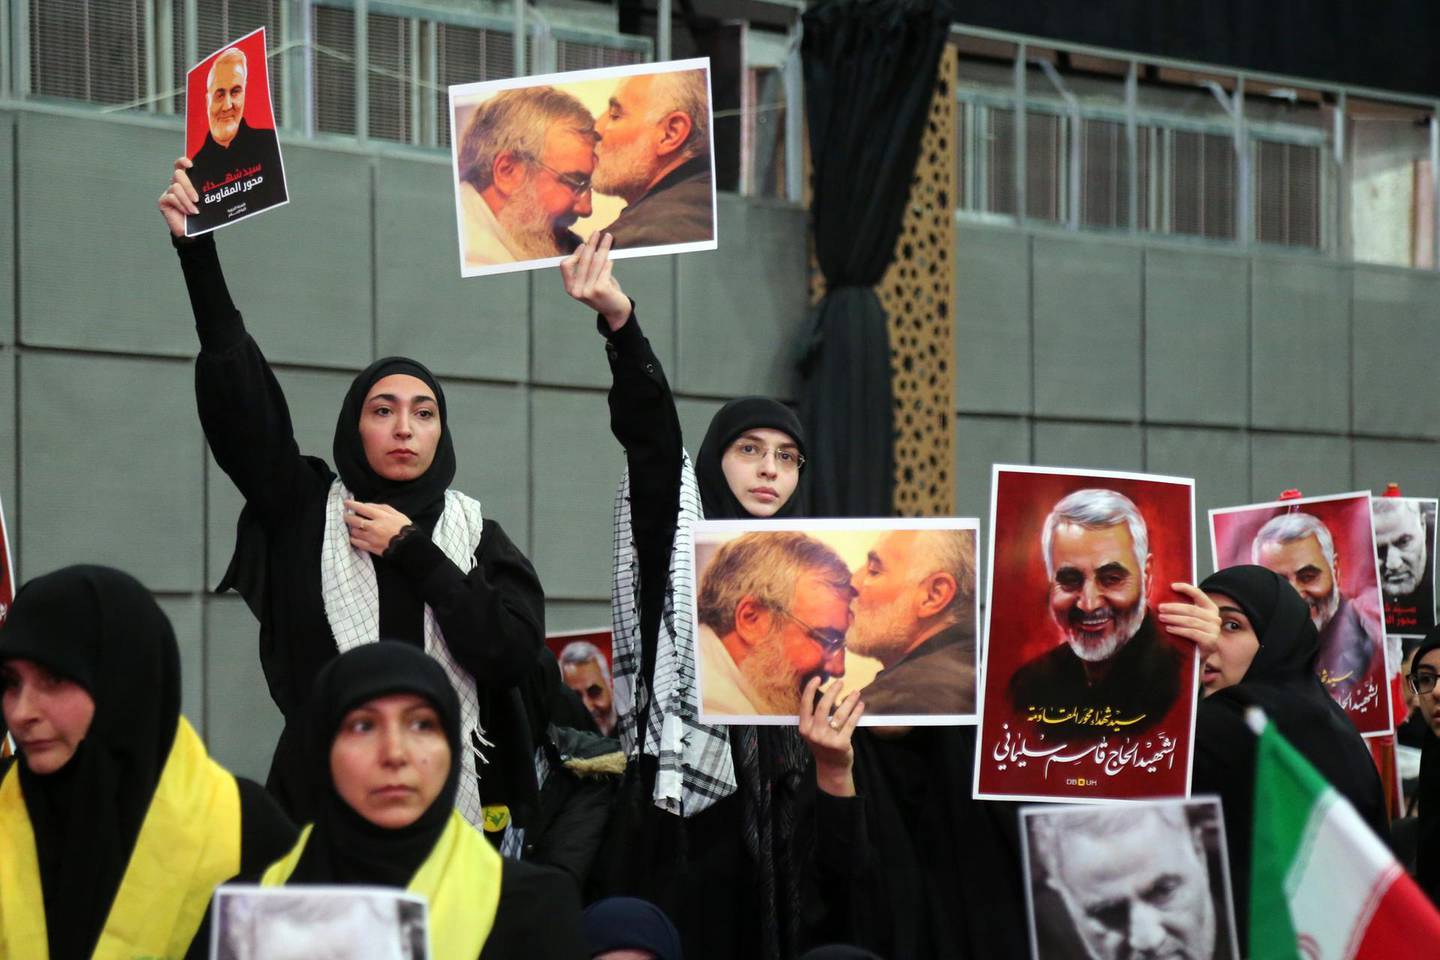 Hezbollah supporters hold pictures of Qassem Soleimani, an Iranian commander, and Hassan Nasrallah, leader of Hezbollah, center, as Nasrallah delivers a televised speech, in Beirut, Lebanon, on Sunday, Jan. 5, 2020. Nasrallah, the leader of Iran’s Lebanese ally, Hezbollah, said the the conflict had entered a “new phase” and the price of Soleimani’s death should be the end of U.S. military presence across the region. Photographer: Hasan Shaaban/Bloomberg